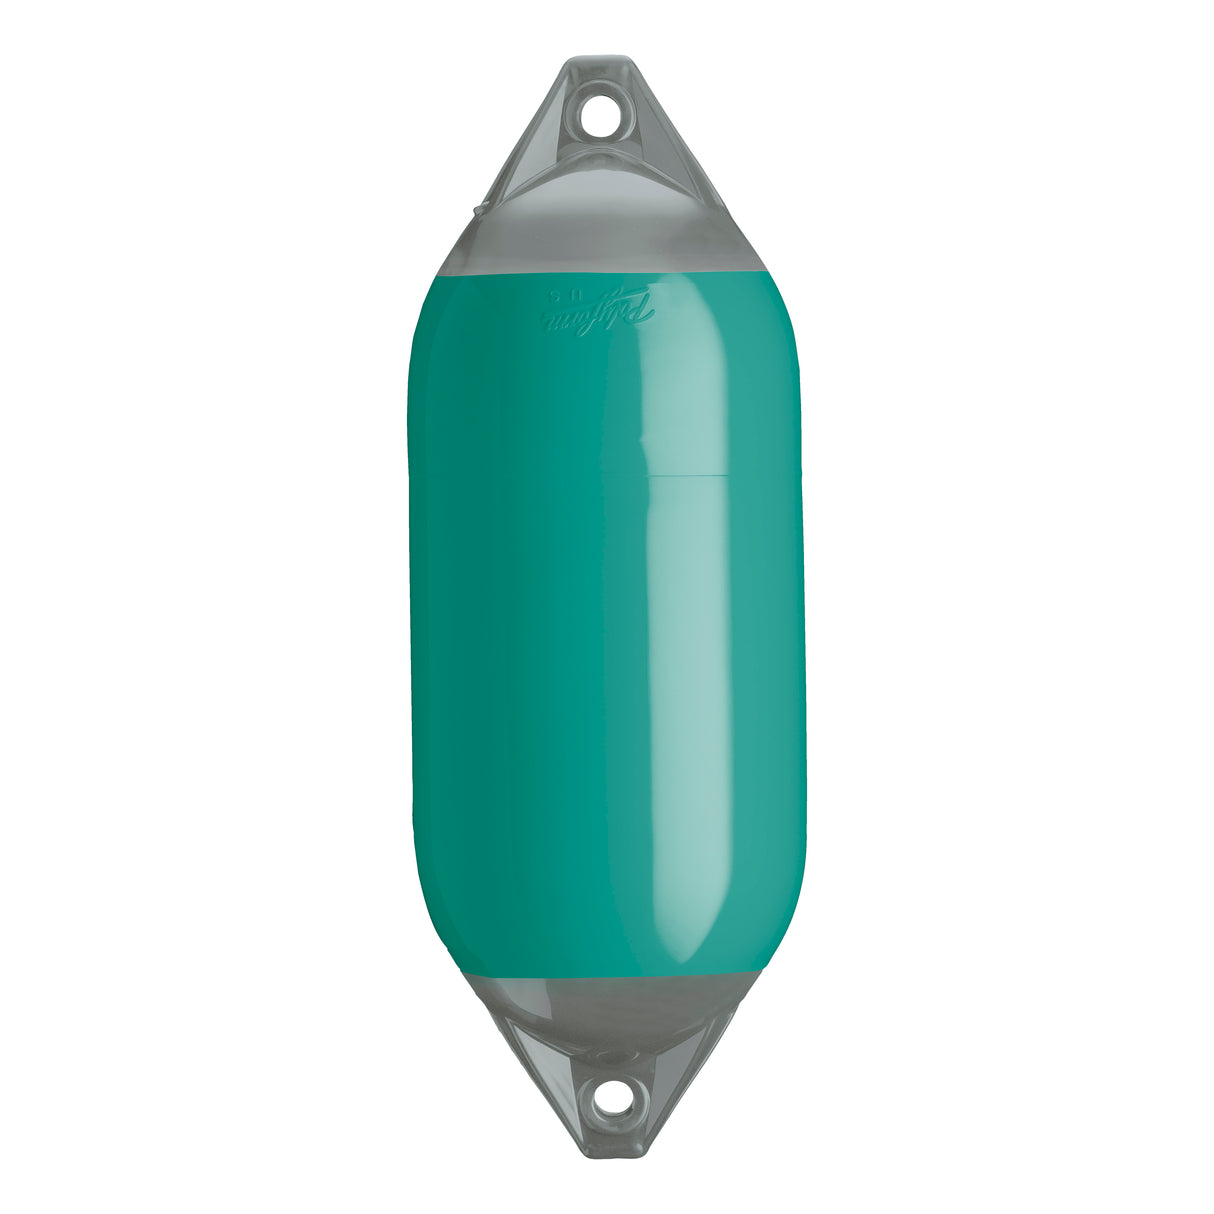 Teal boat fender with Grey-Top, Polyform F-5